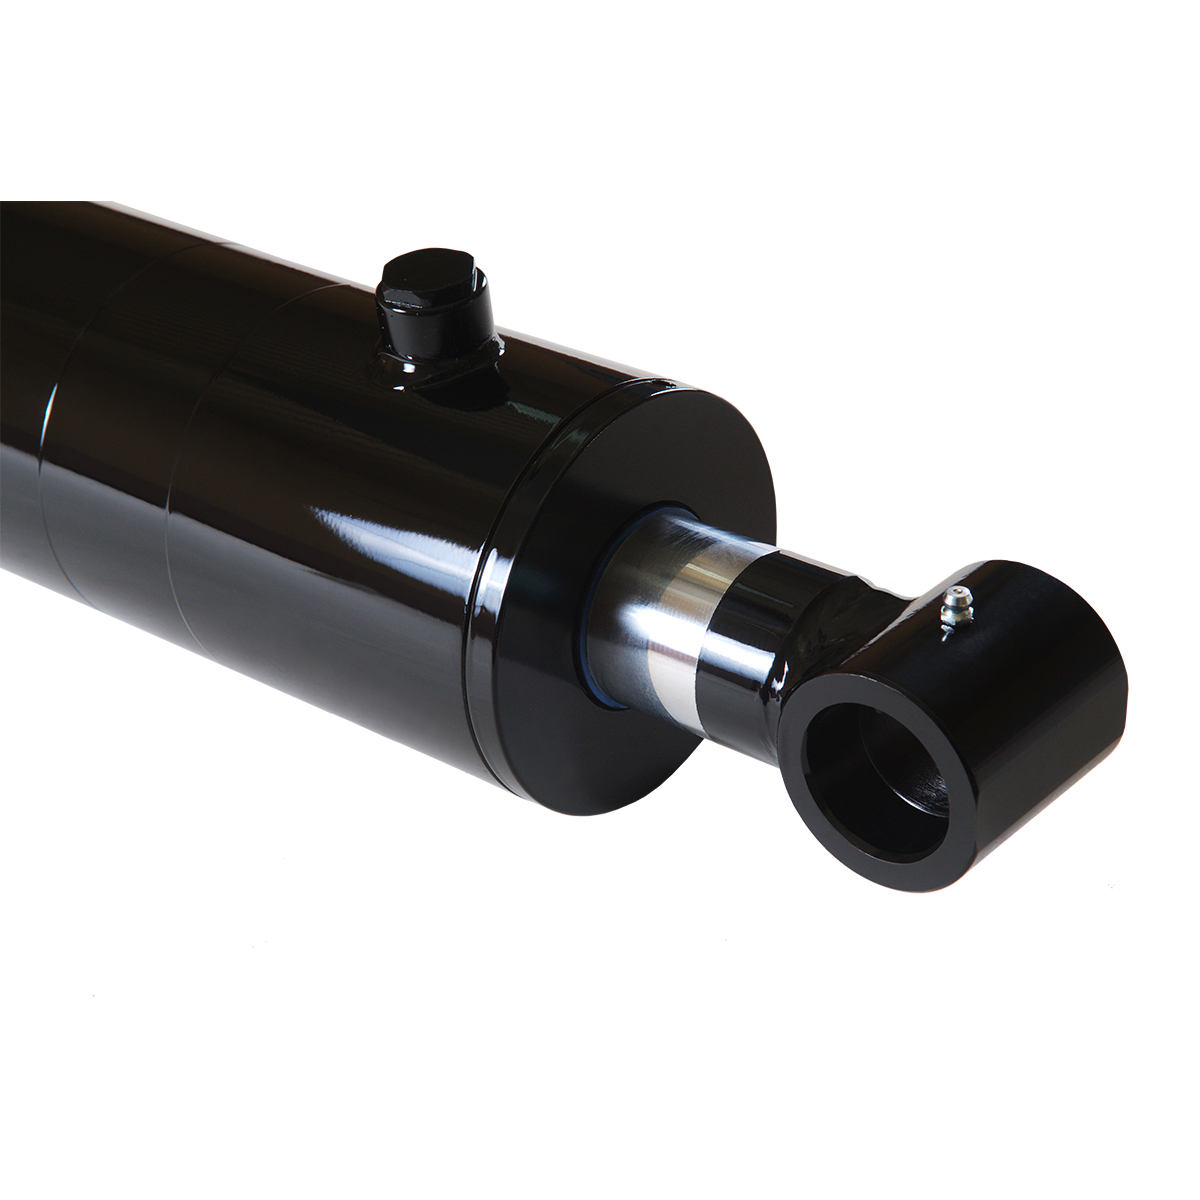 4 bore x 30 stroke hydraulic cylinder, welded cross tube double acting cylinder | Magister Hydraulics